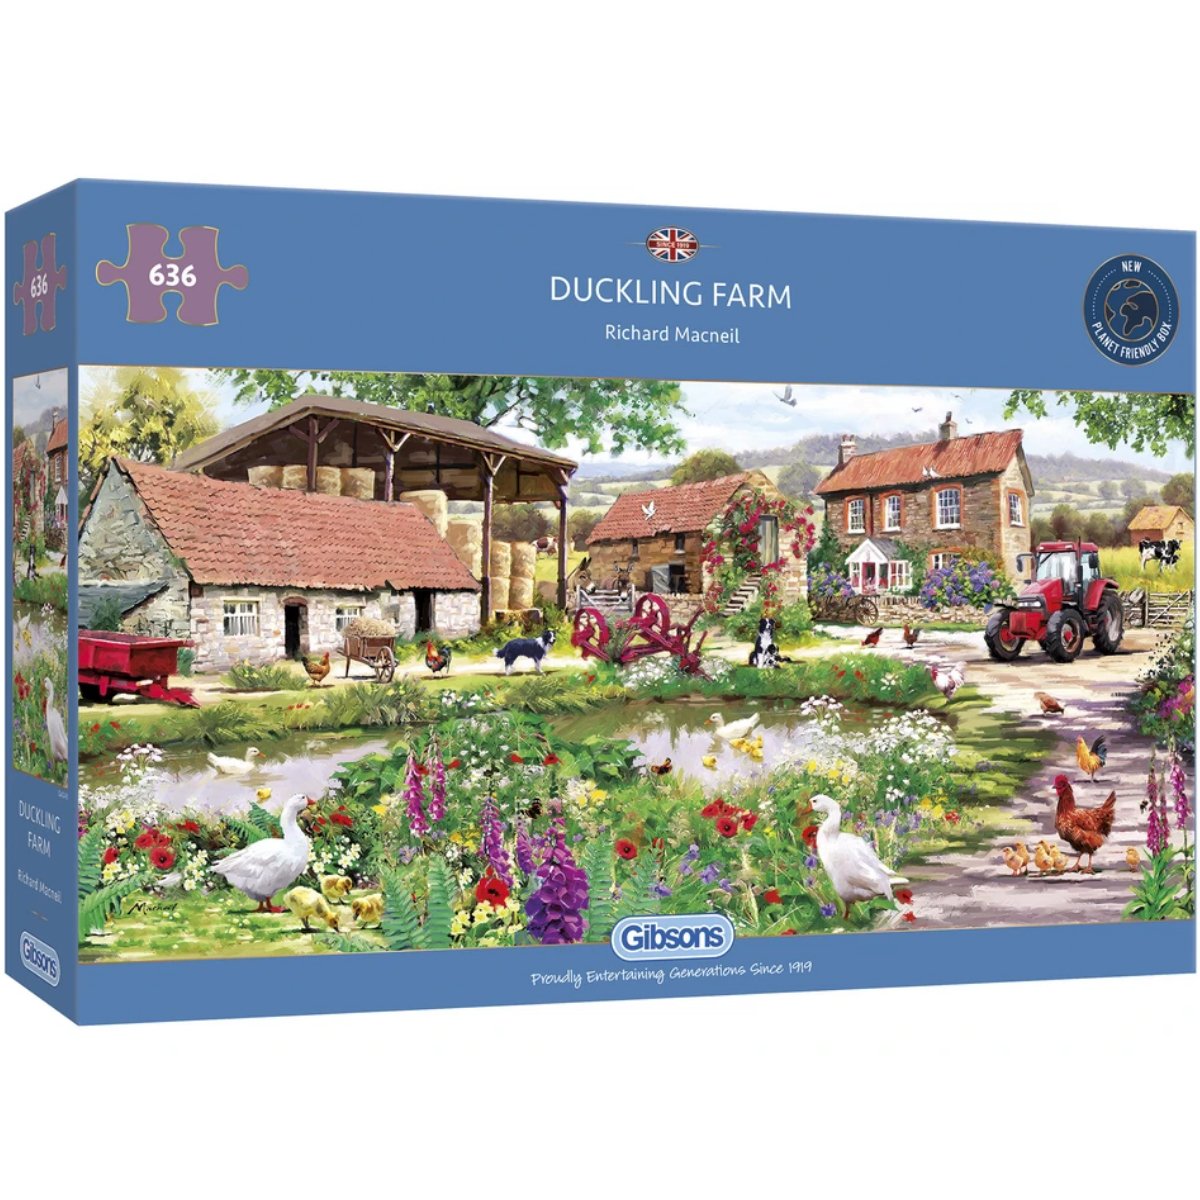 Gibsons Duckling Farm Jigsaw Puzzle (636 Pieces) - Phillips Hobbies